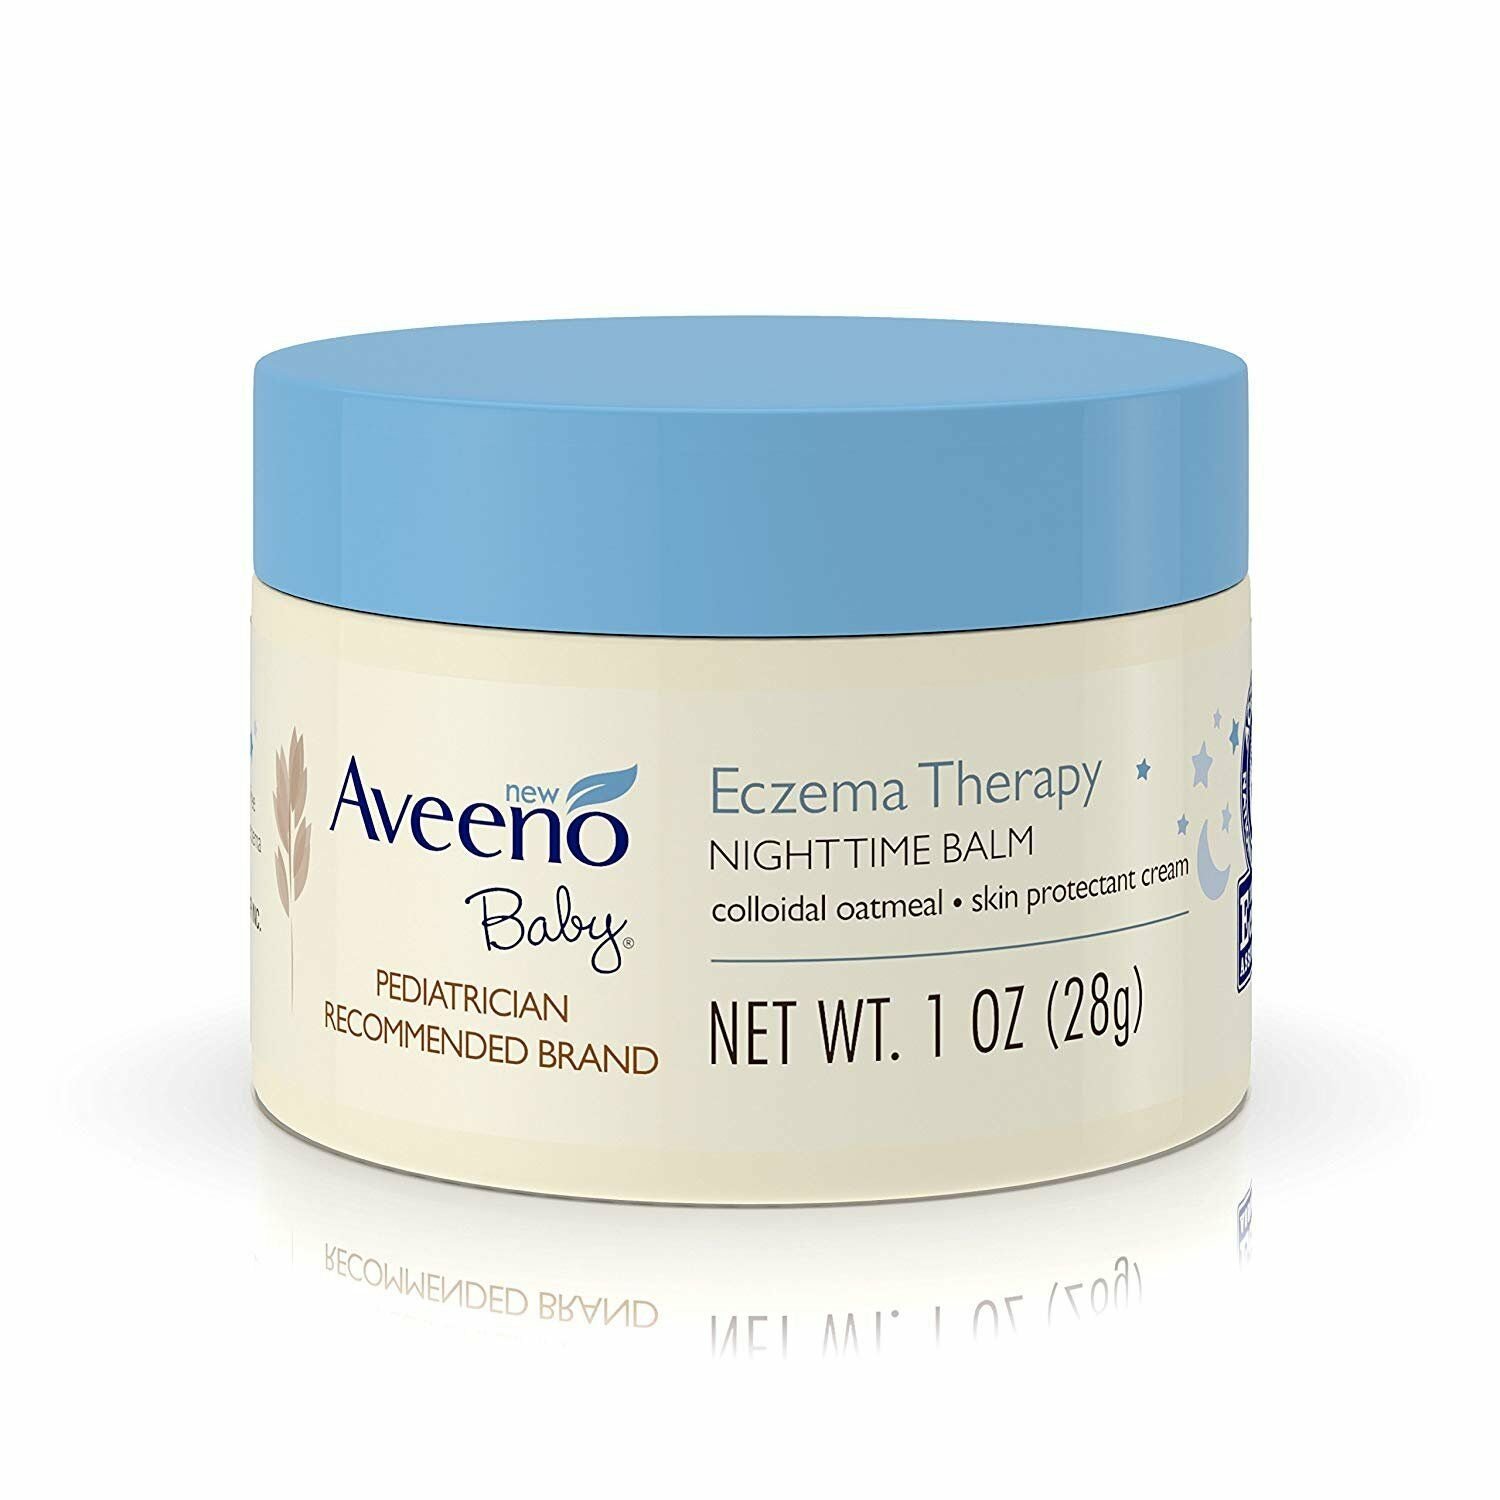 Aveeno Baby Eczema Therapy Nighttime Balm  1 Ounce  Pack of 2 - image 1 of 3